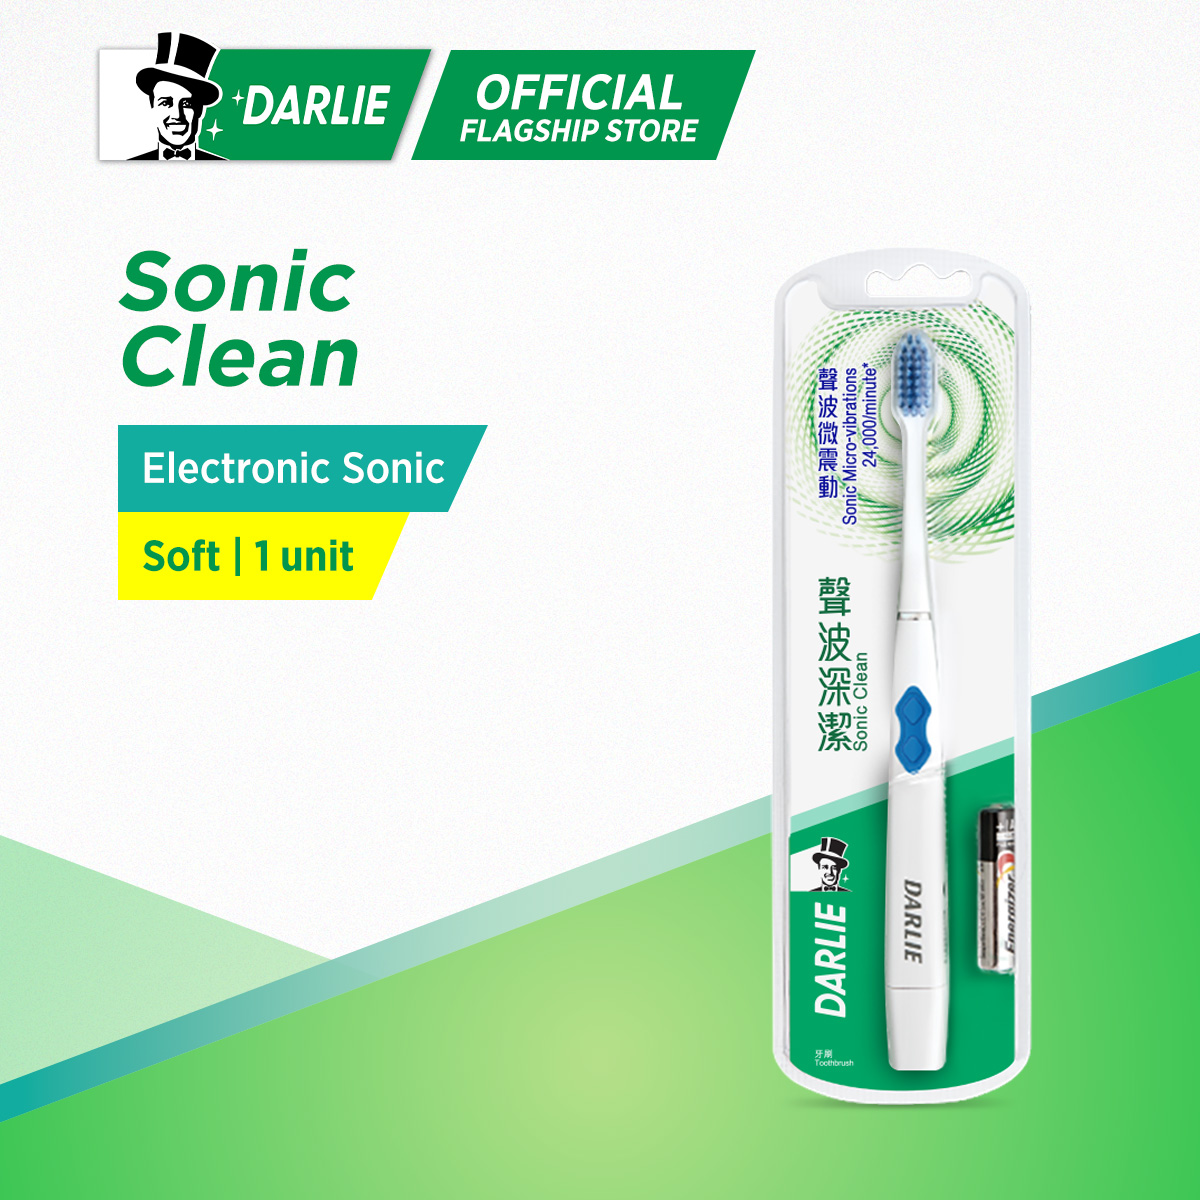 Darlie Sonic Toothbrush Battery Powered Includes 1 AAA Battery